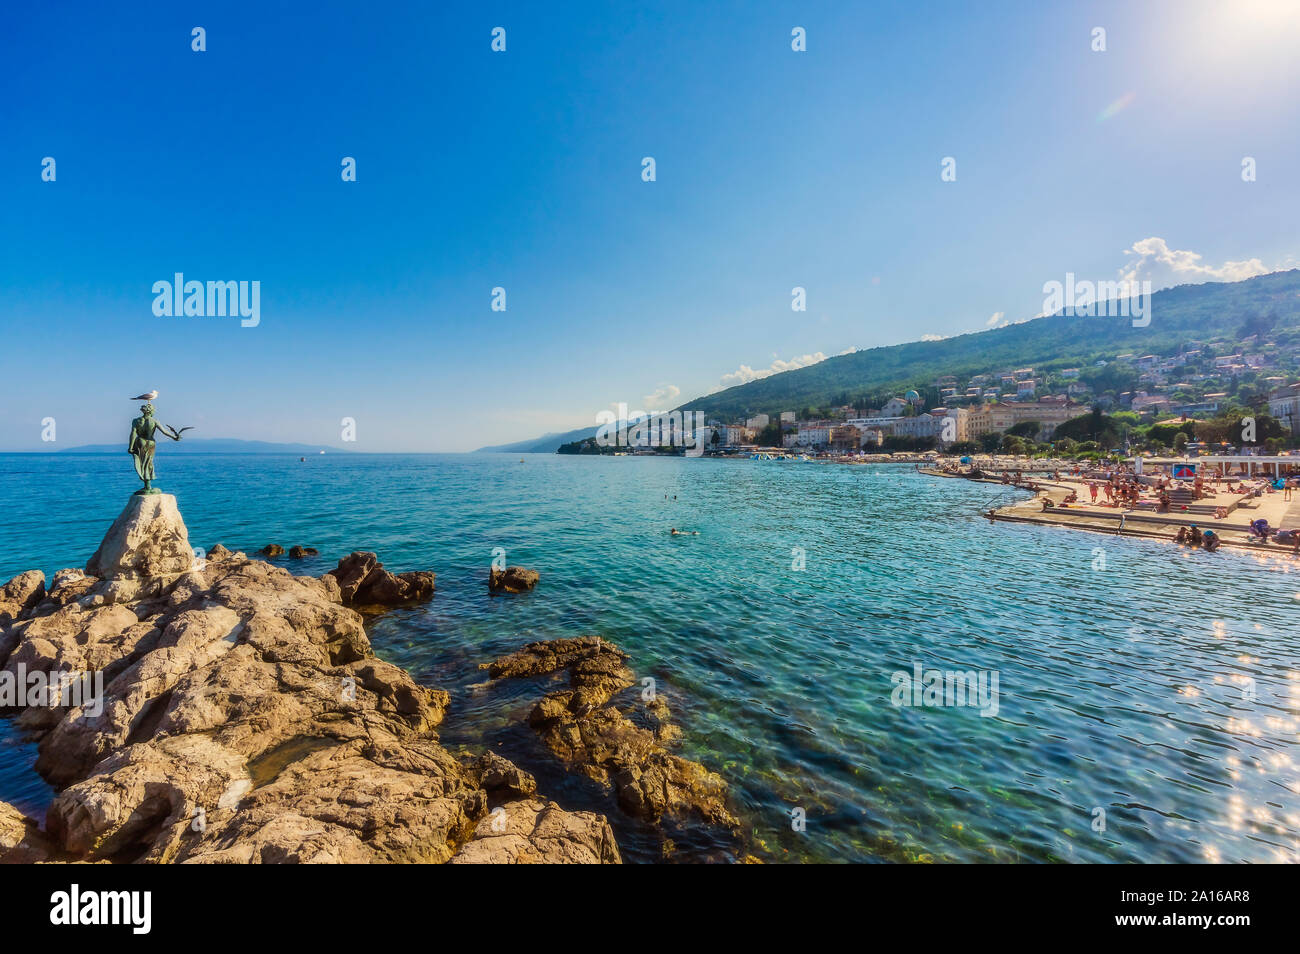 Opatija town at coast of Adriatic Sea against blue sky during sunny day Stock Photo